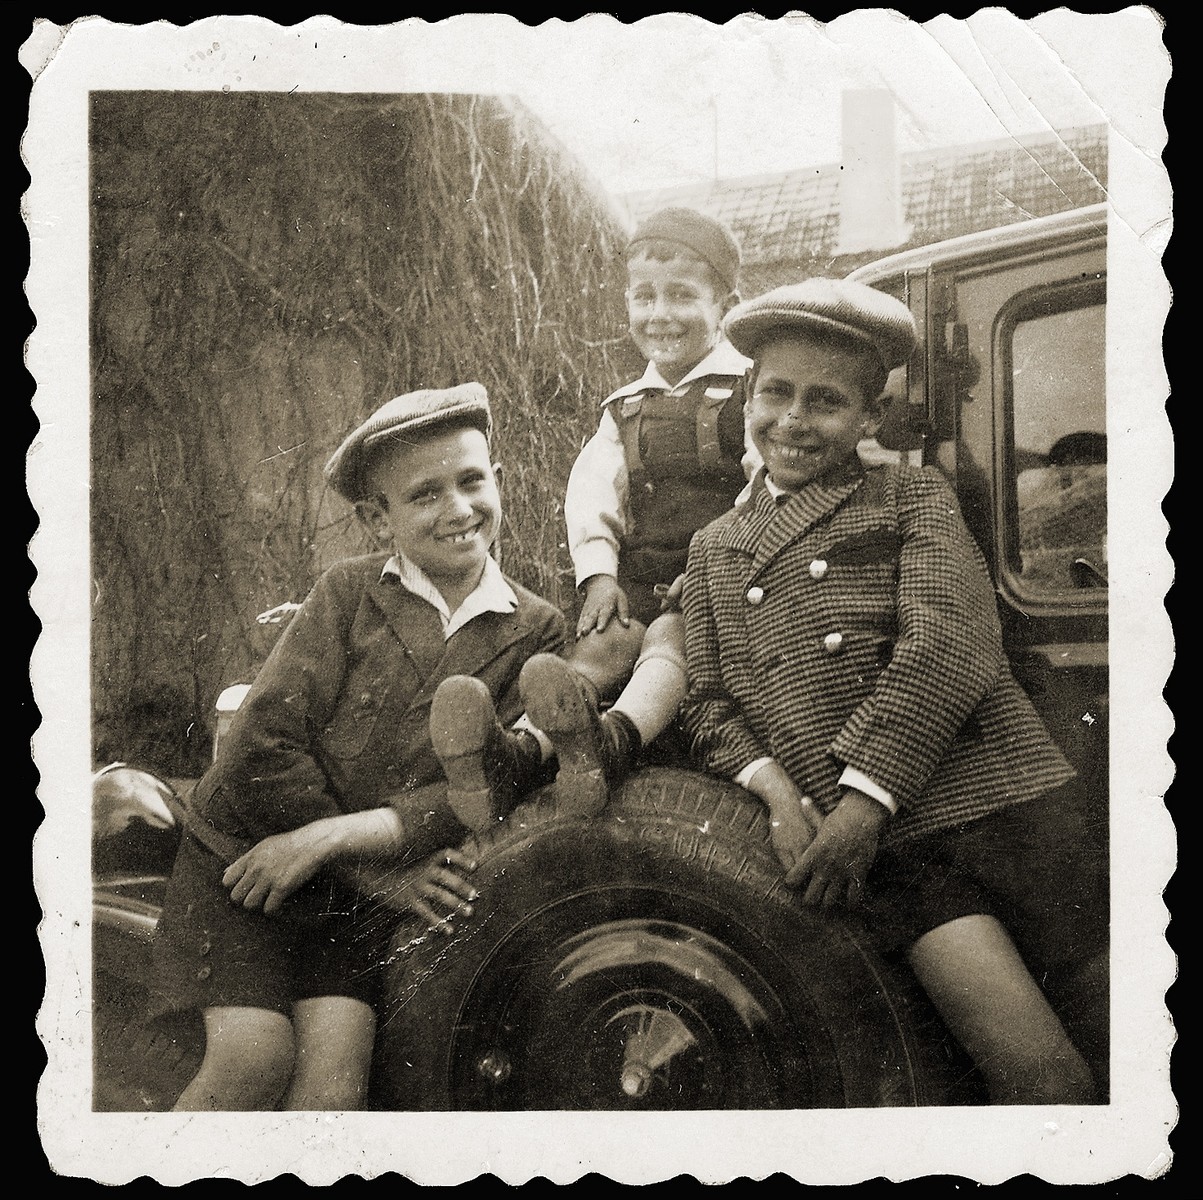 The donor's brother, Akiva Schwarcz, with her nephews, Tibi and Sanyi.